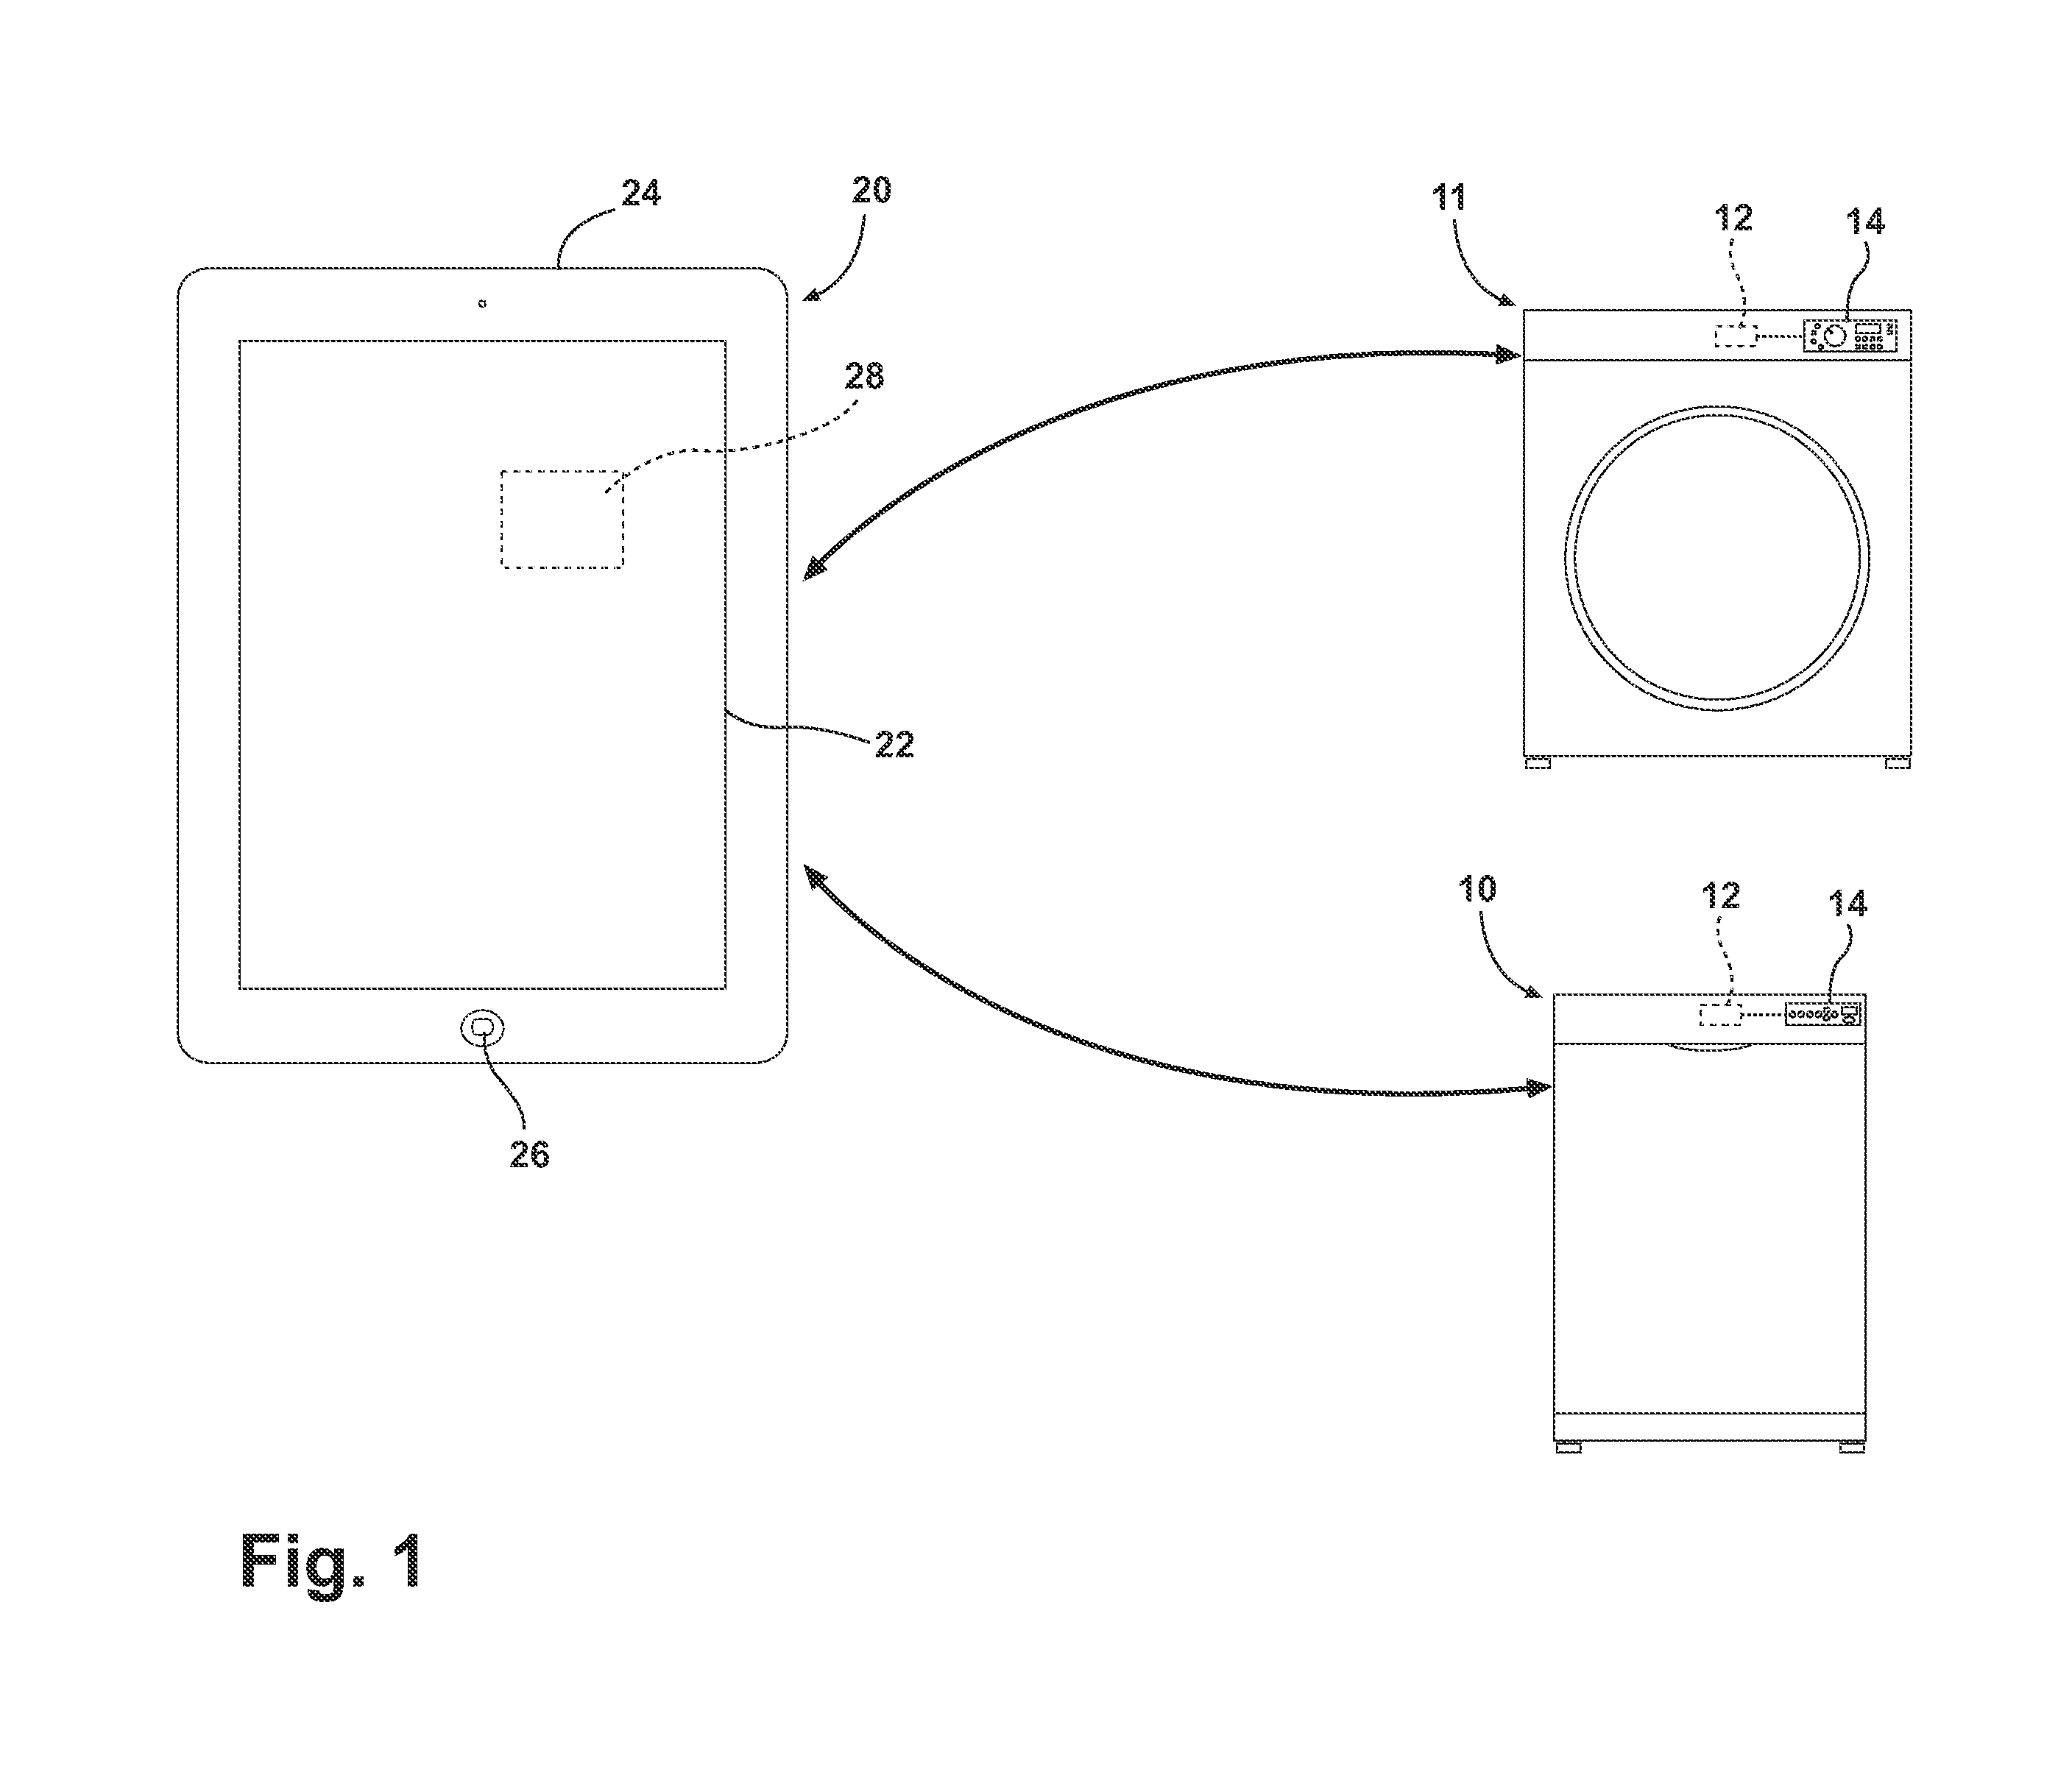 Method of sorting articles for treatment according to a cycle of operation implemented by an appliance